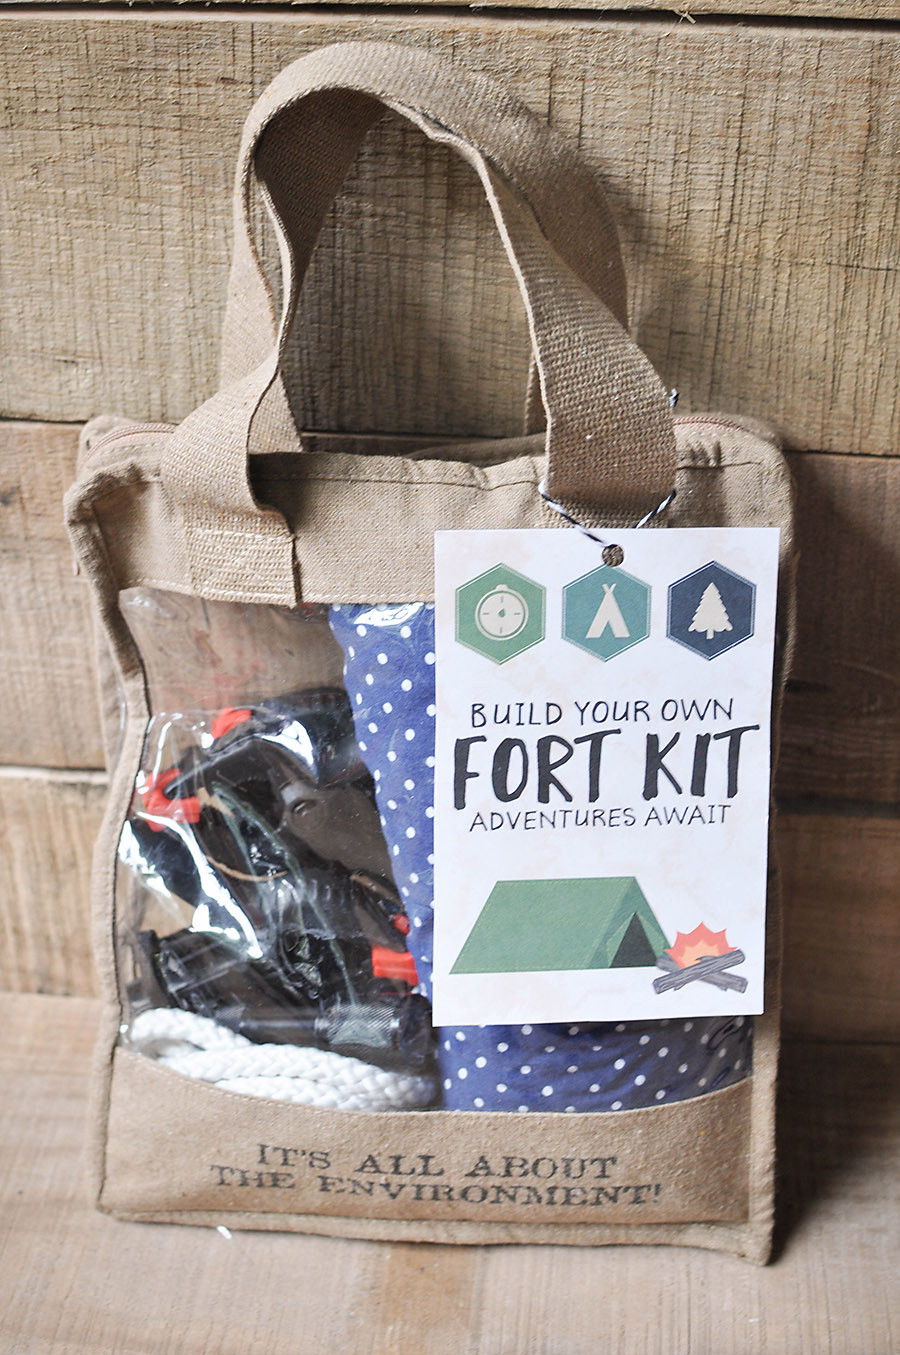 Fort Kit DIY
 DIY Fort Kit with a Free Printable Gift Tag Our